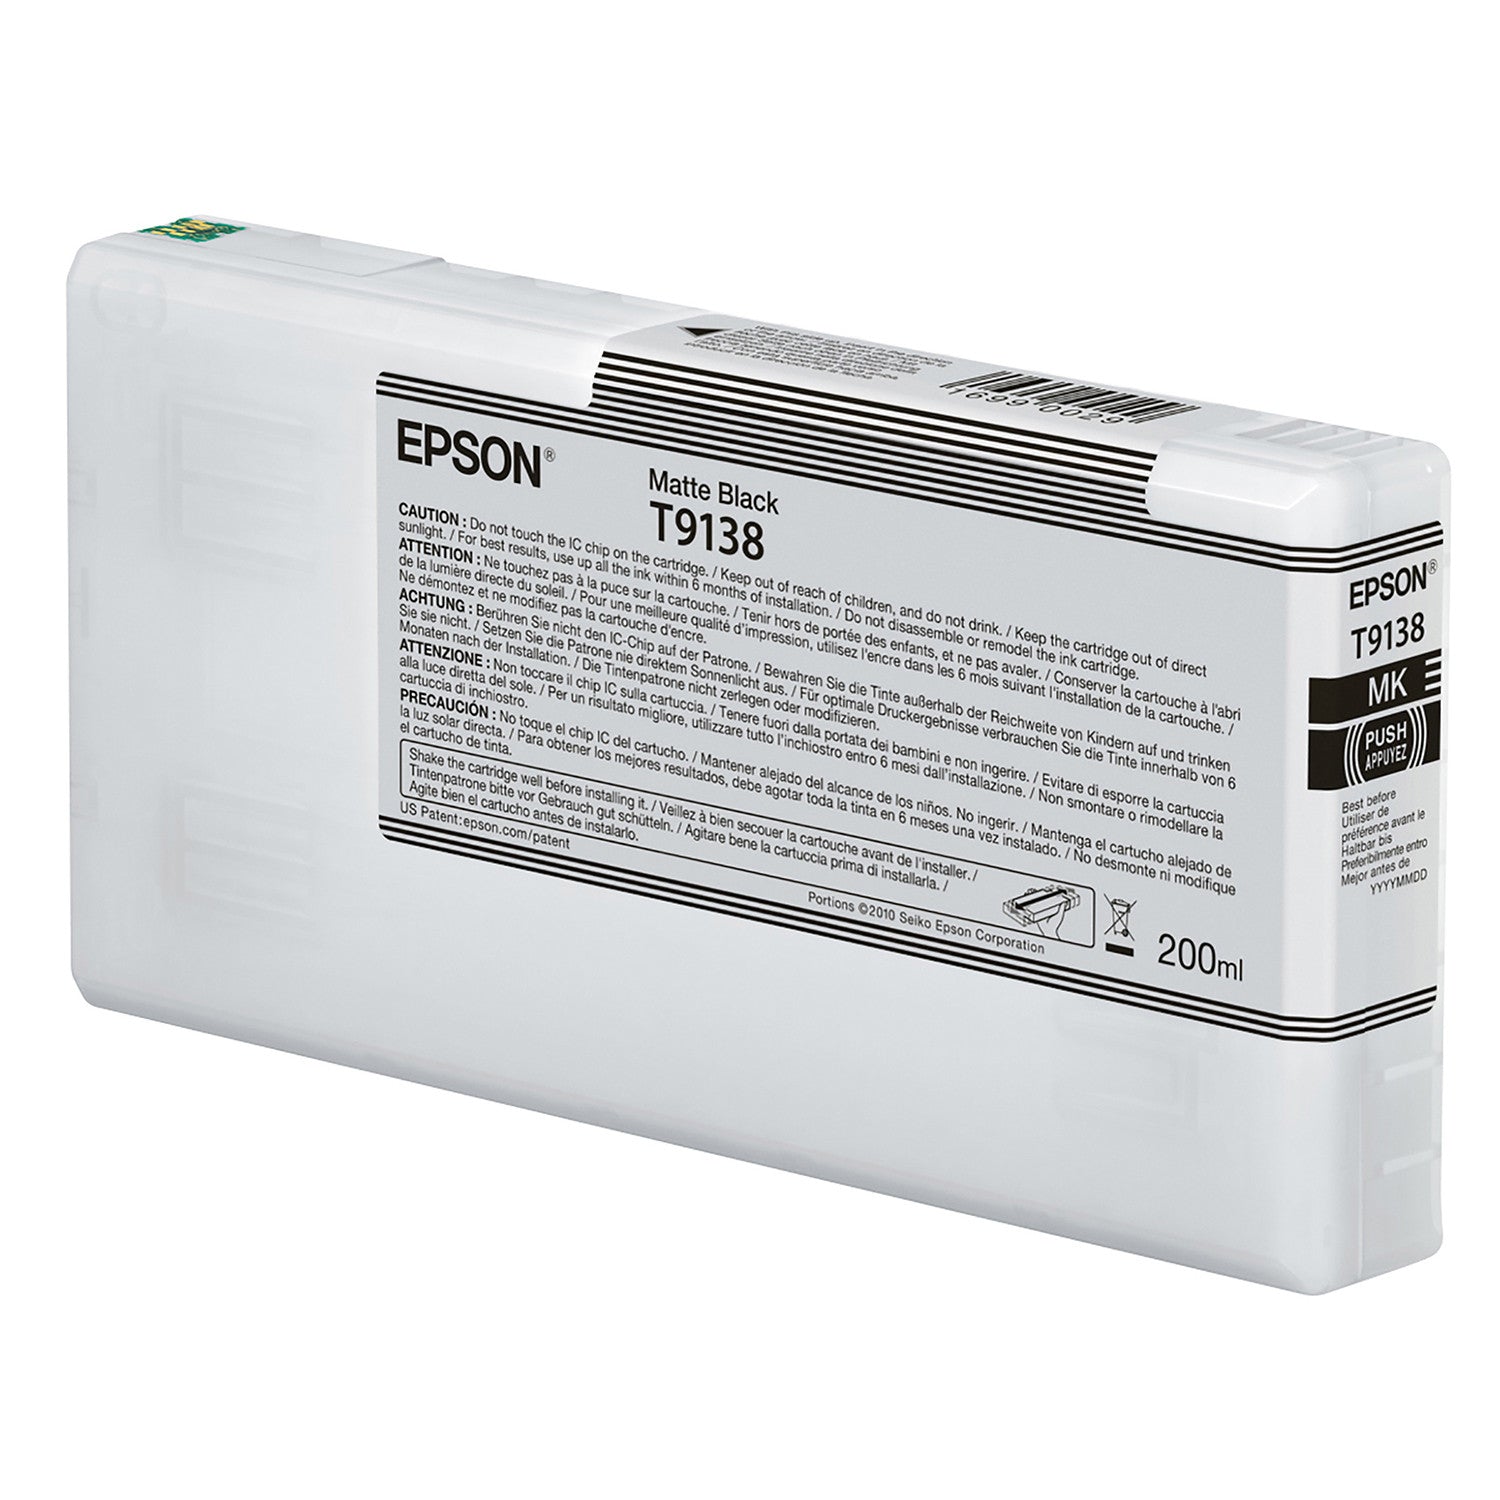 Epson T913800 P5000 Ultrachrome HD Ink 200ml Matte Black, papers printer ink, Epson - Pictureline 